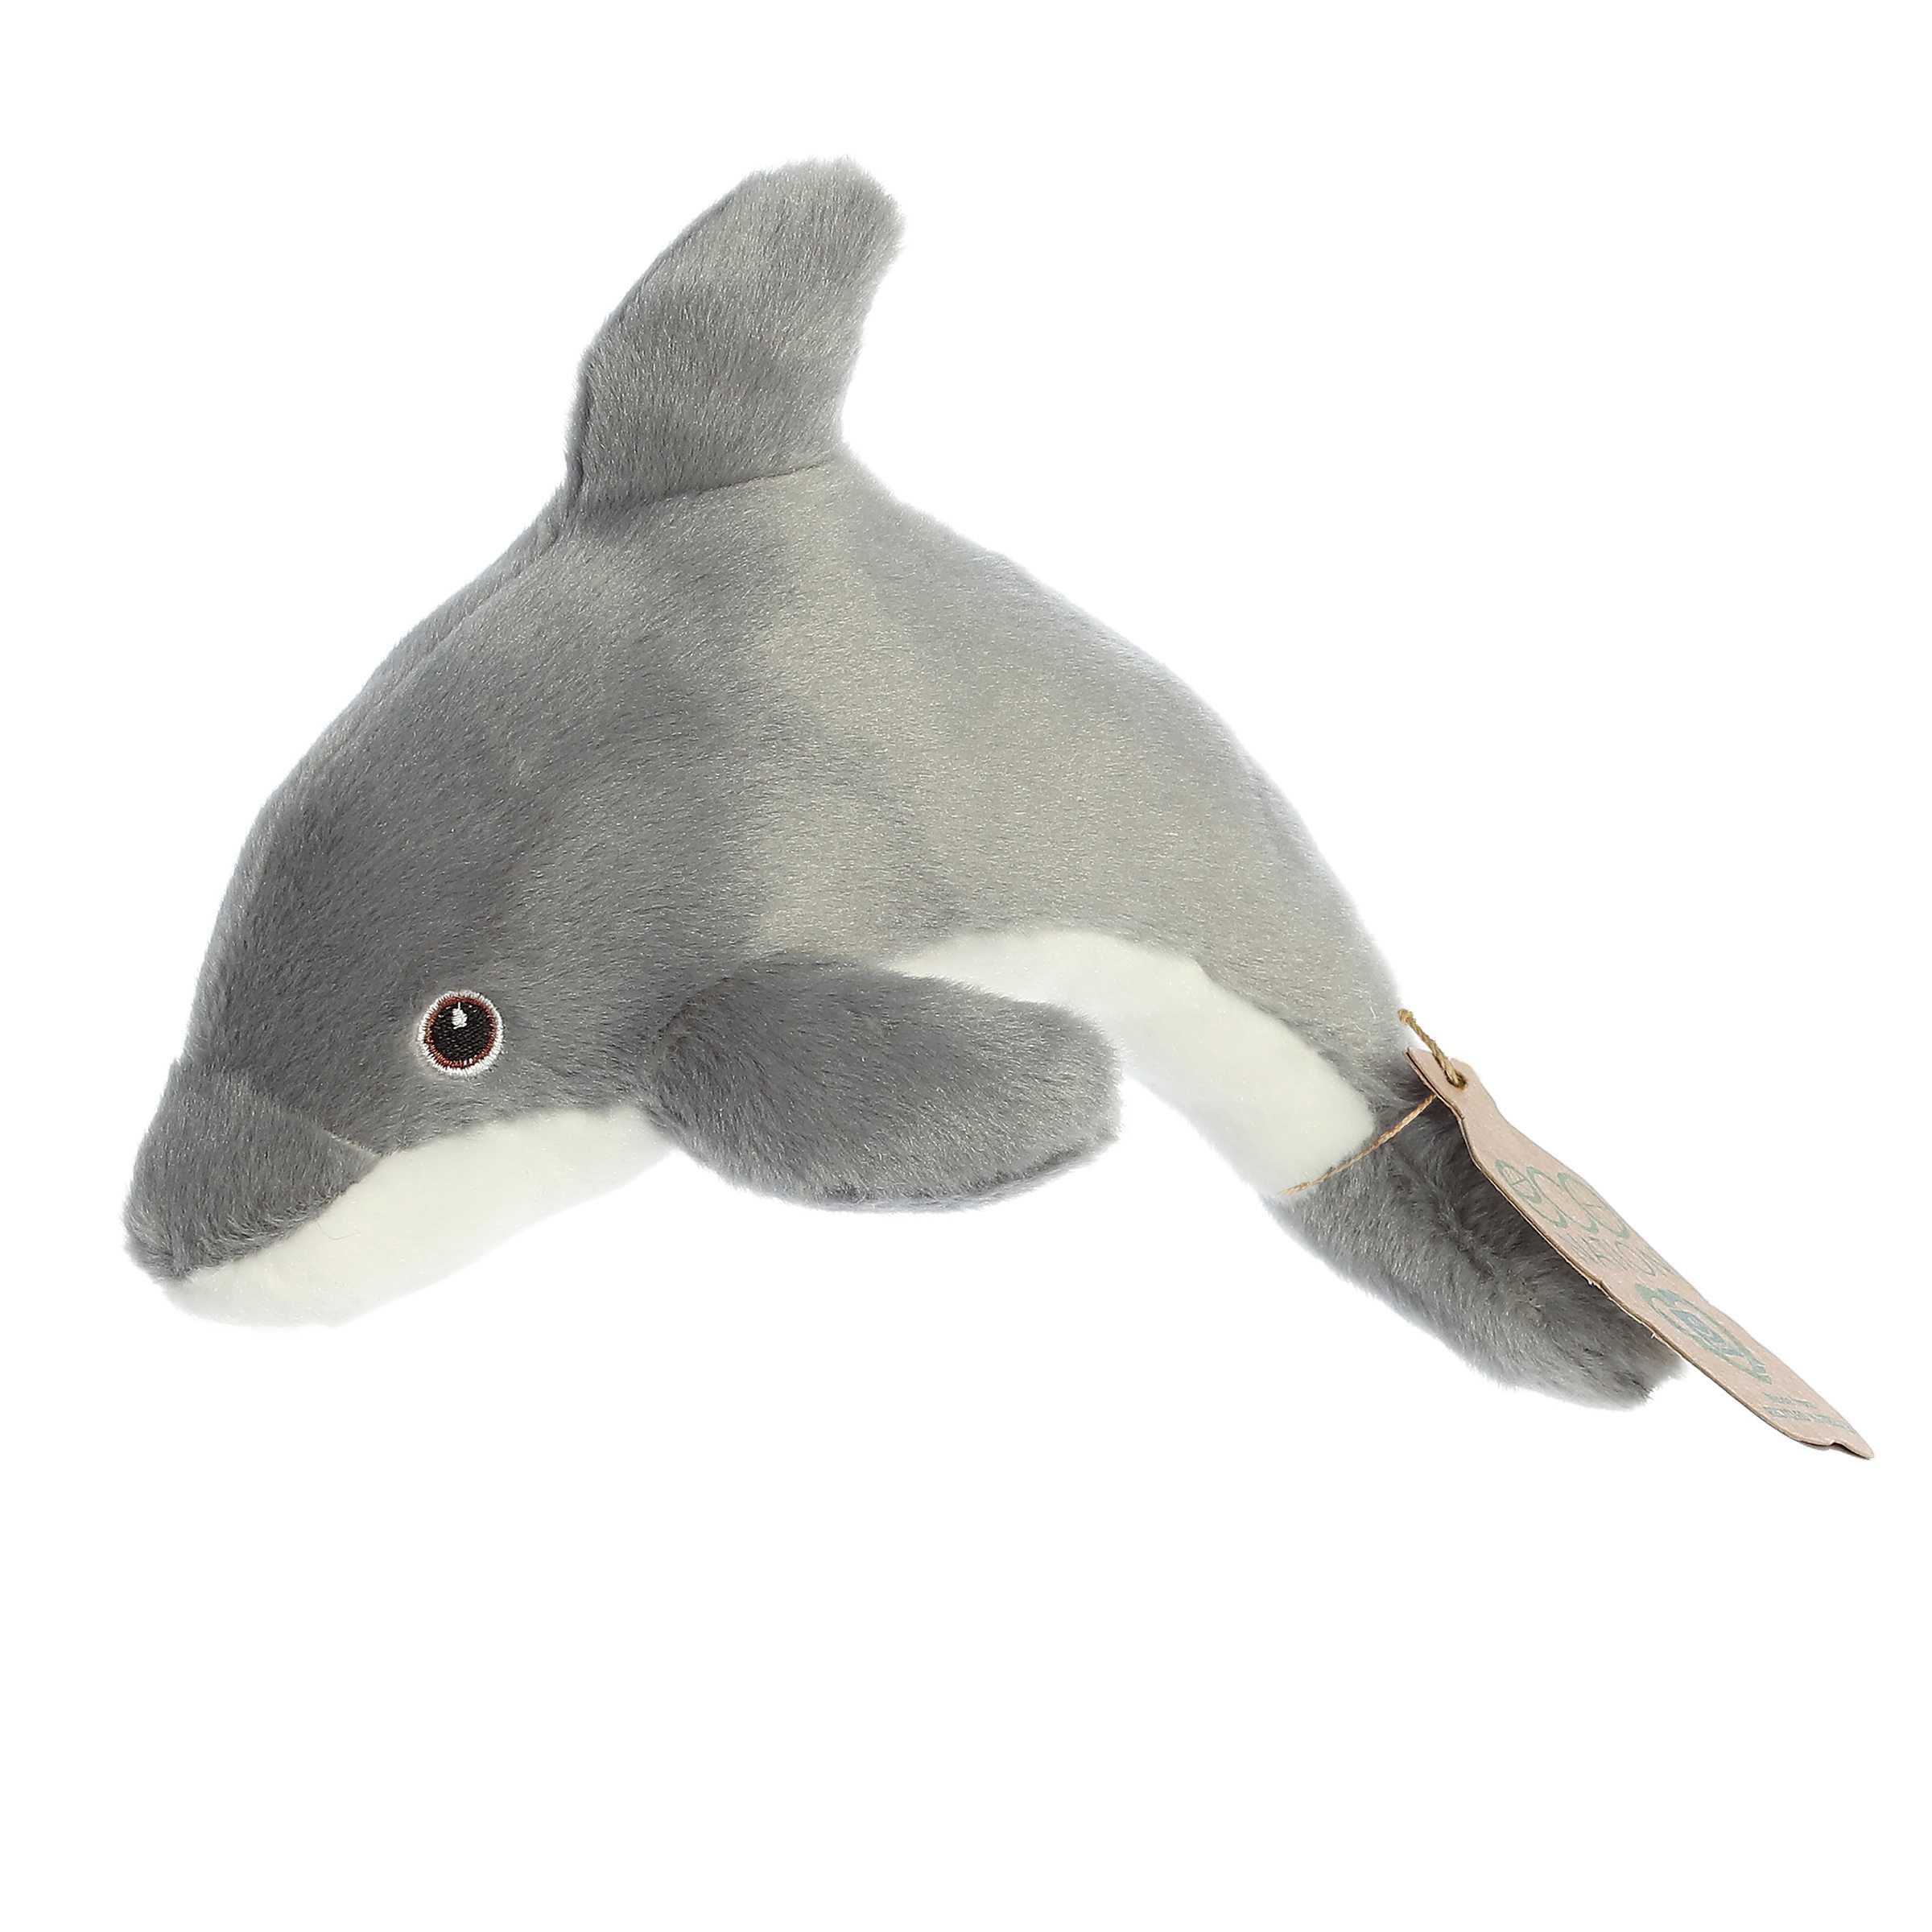 Eco Softie Dolphin Plush in grey and white, made from recycled materials, with a hang tag representing eco-friendliness.